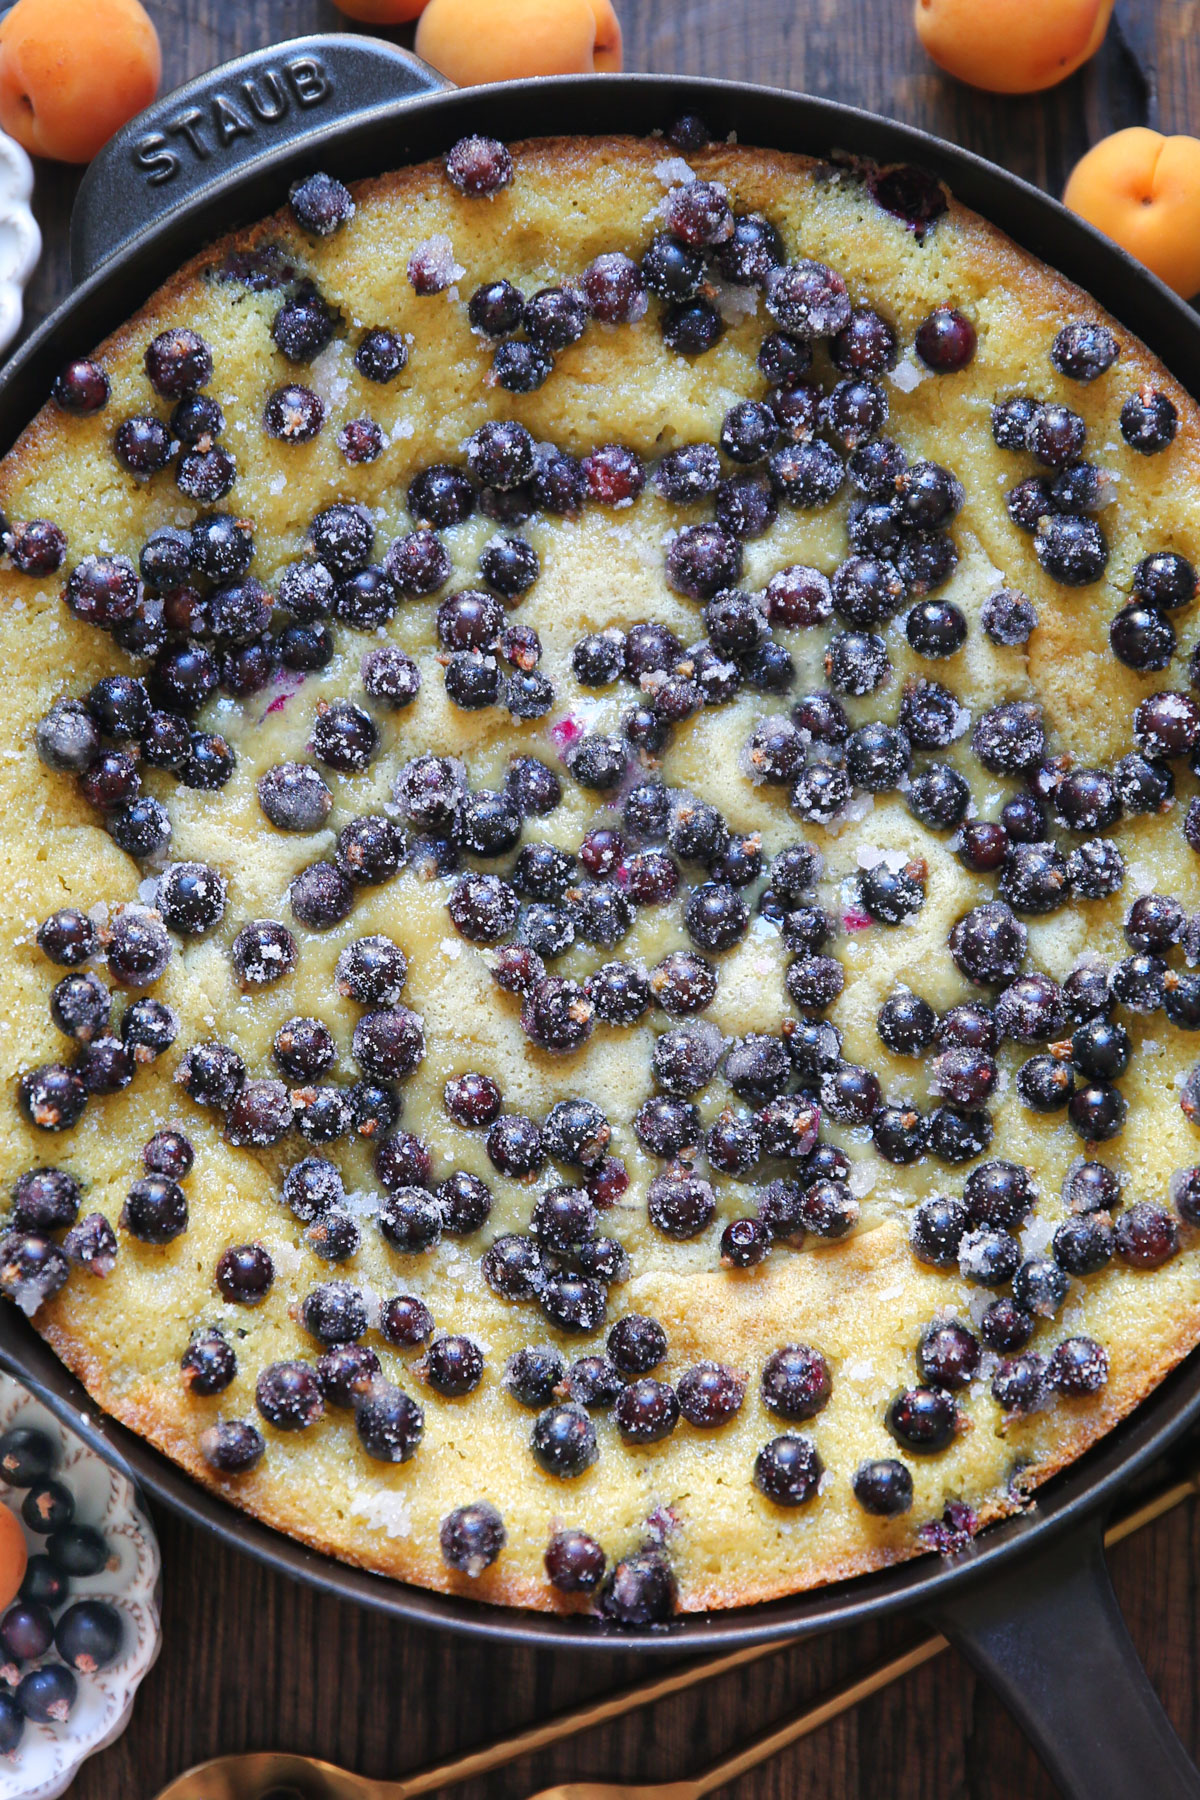 slightly baked cake batter with fresh black currants on top in a cast iron skillet.